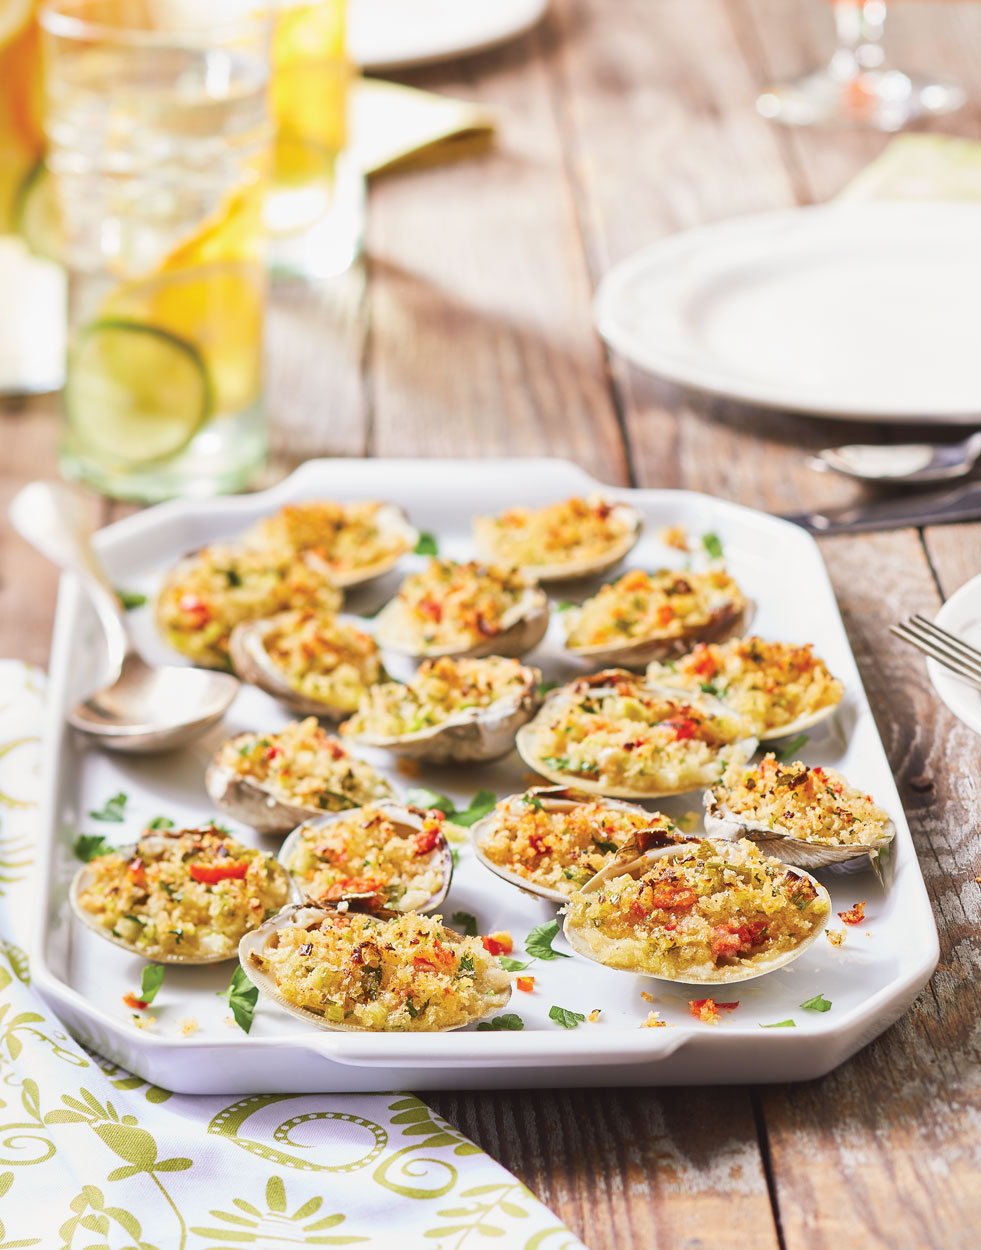 Spicy Stuffed Clams